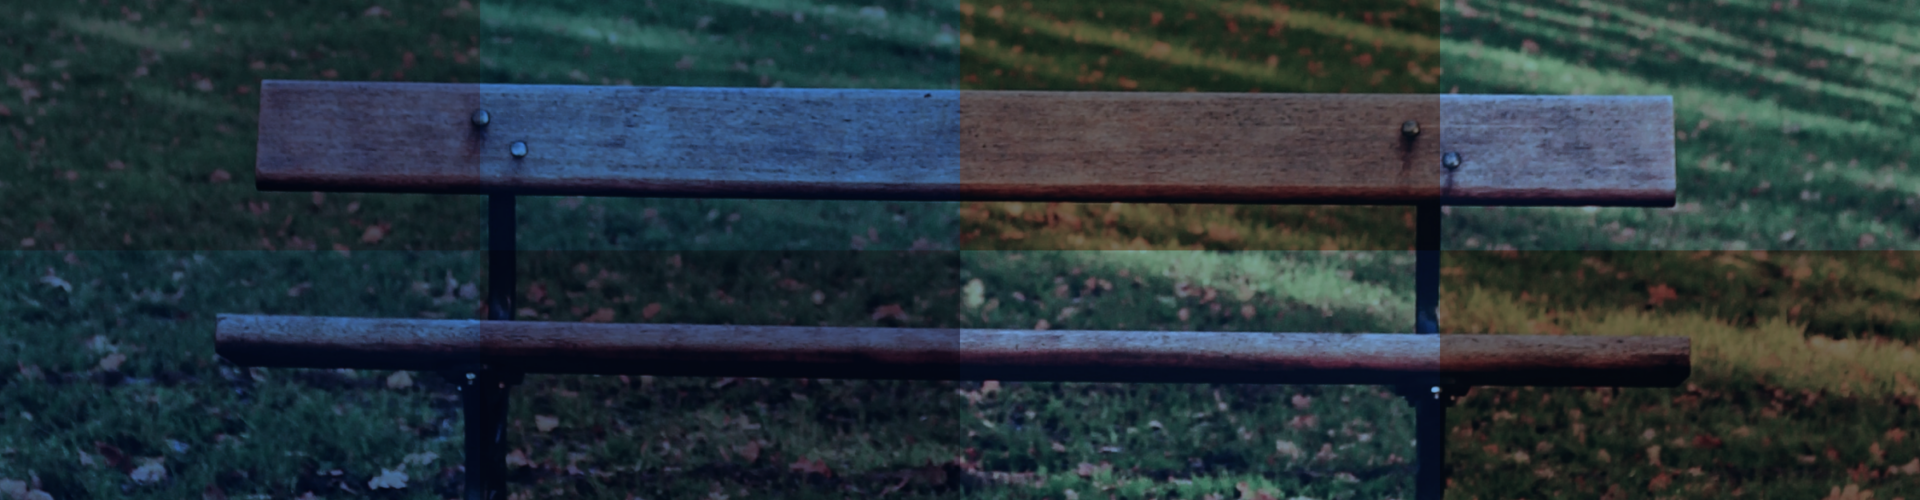 Graphic of a bench with a styled overlay